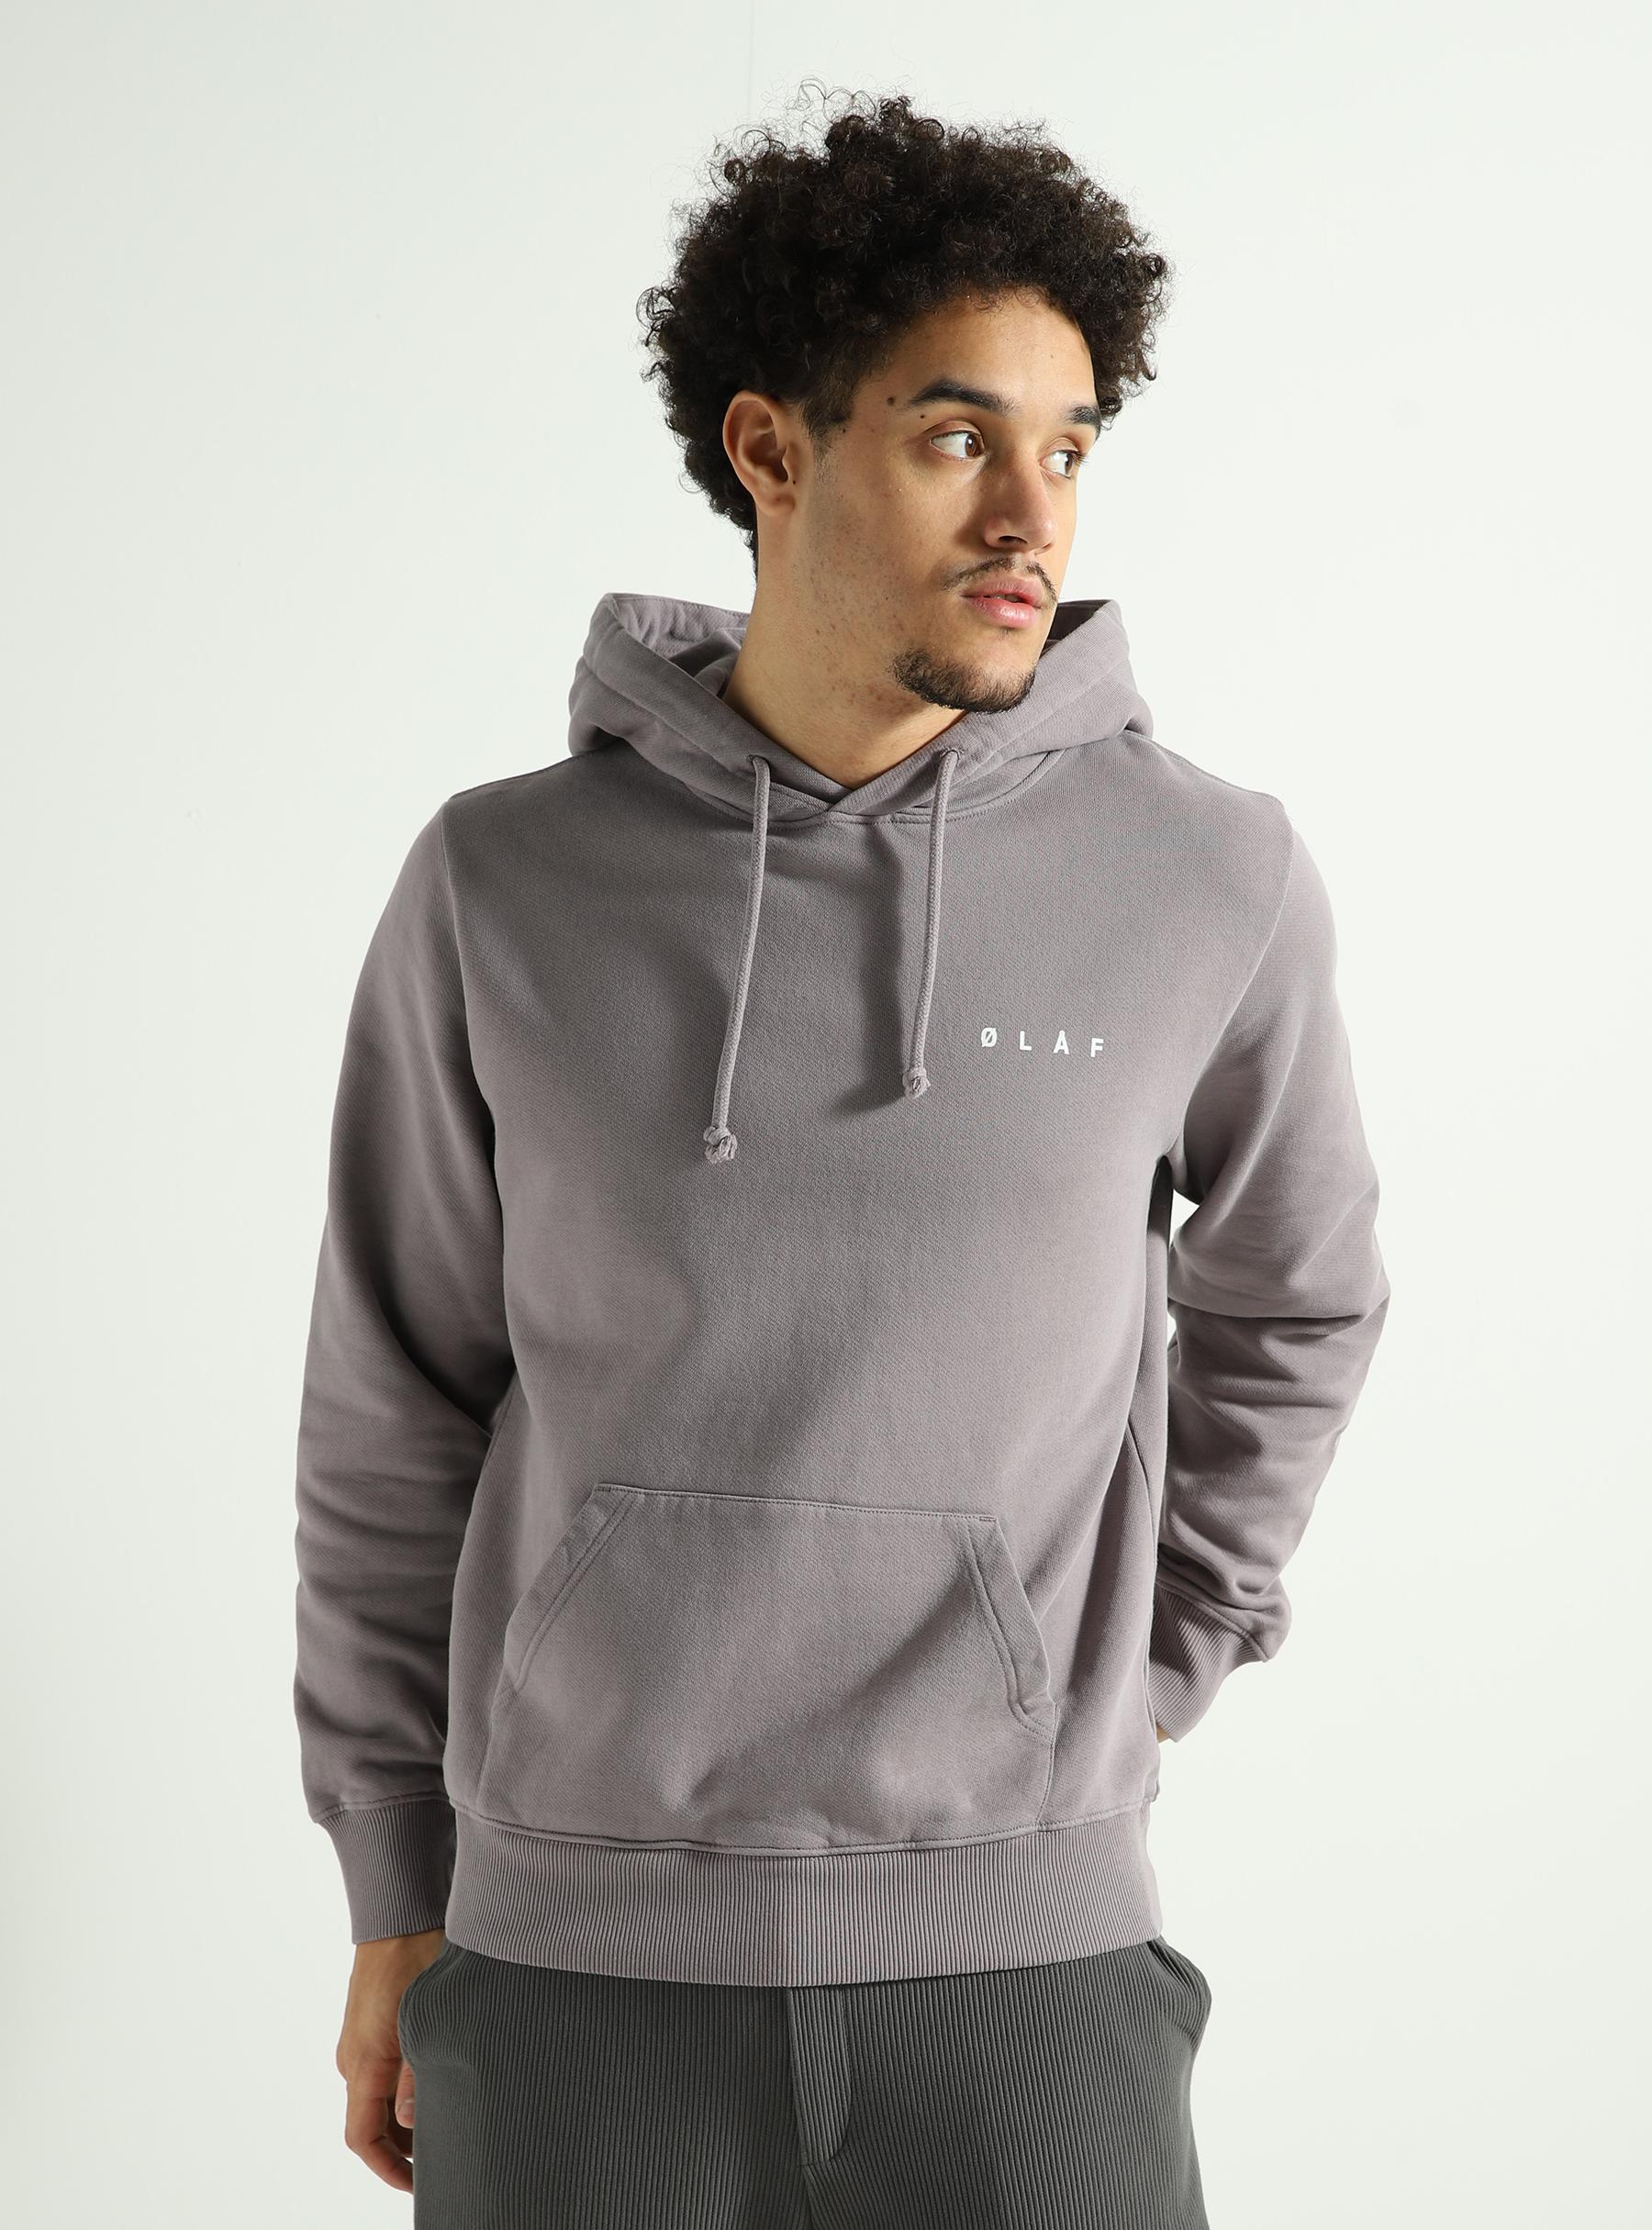 Pixelated Face Hoodie Stone Grey M160211